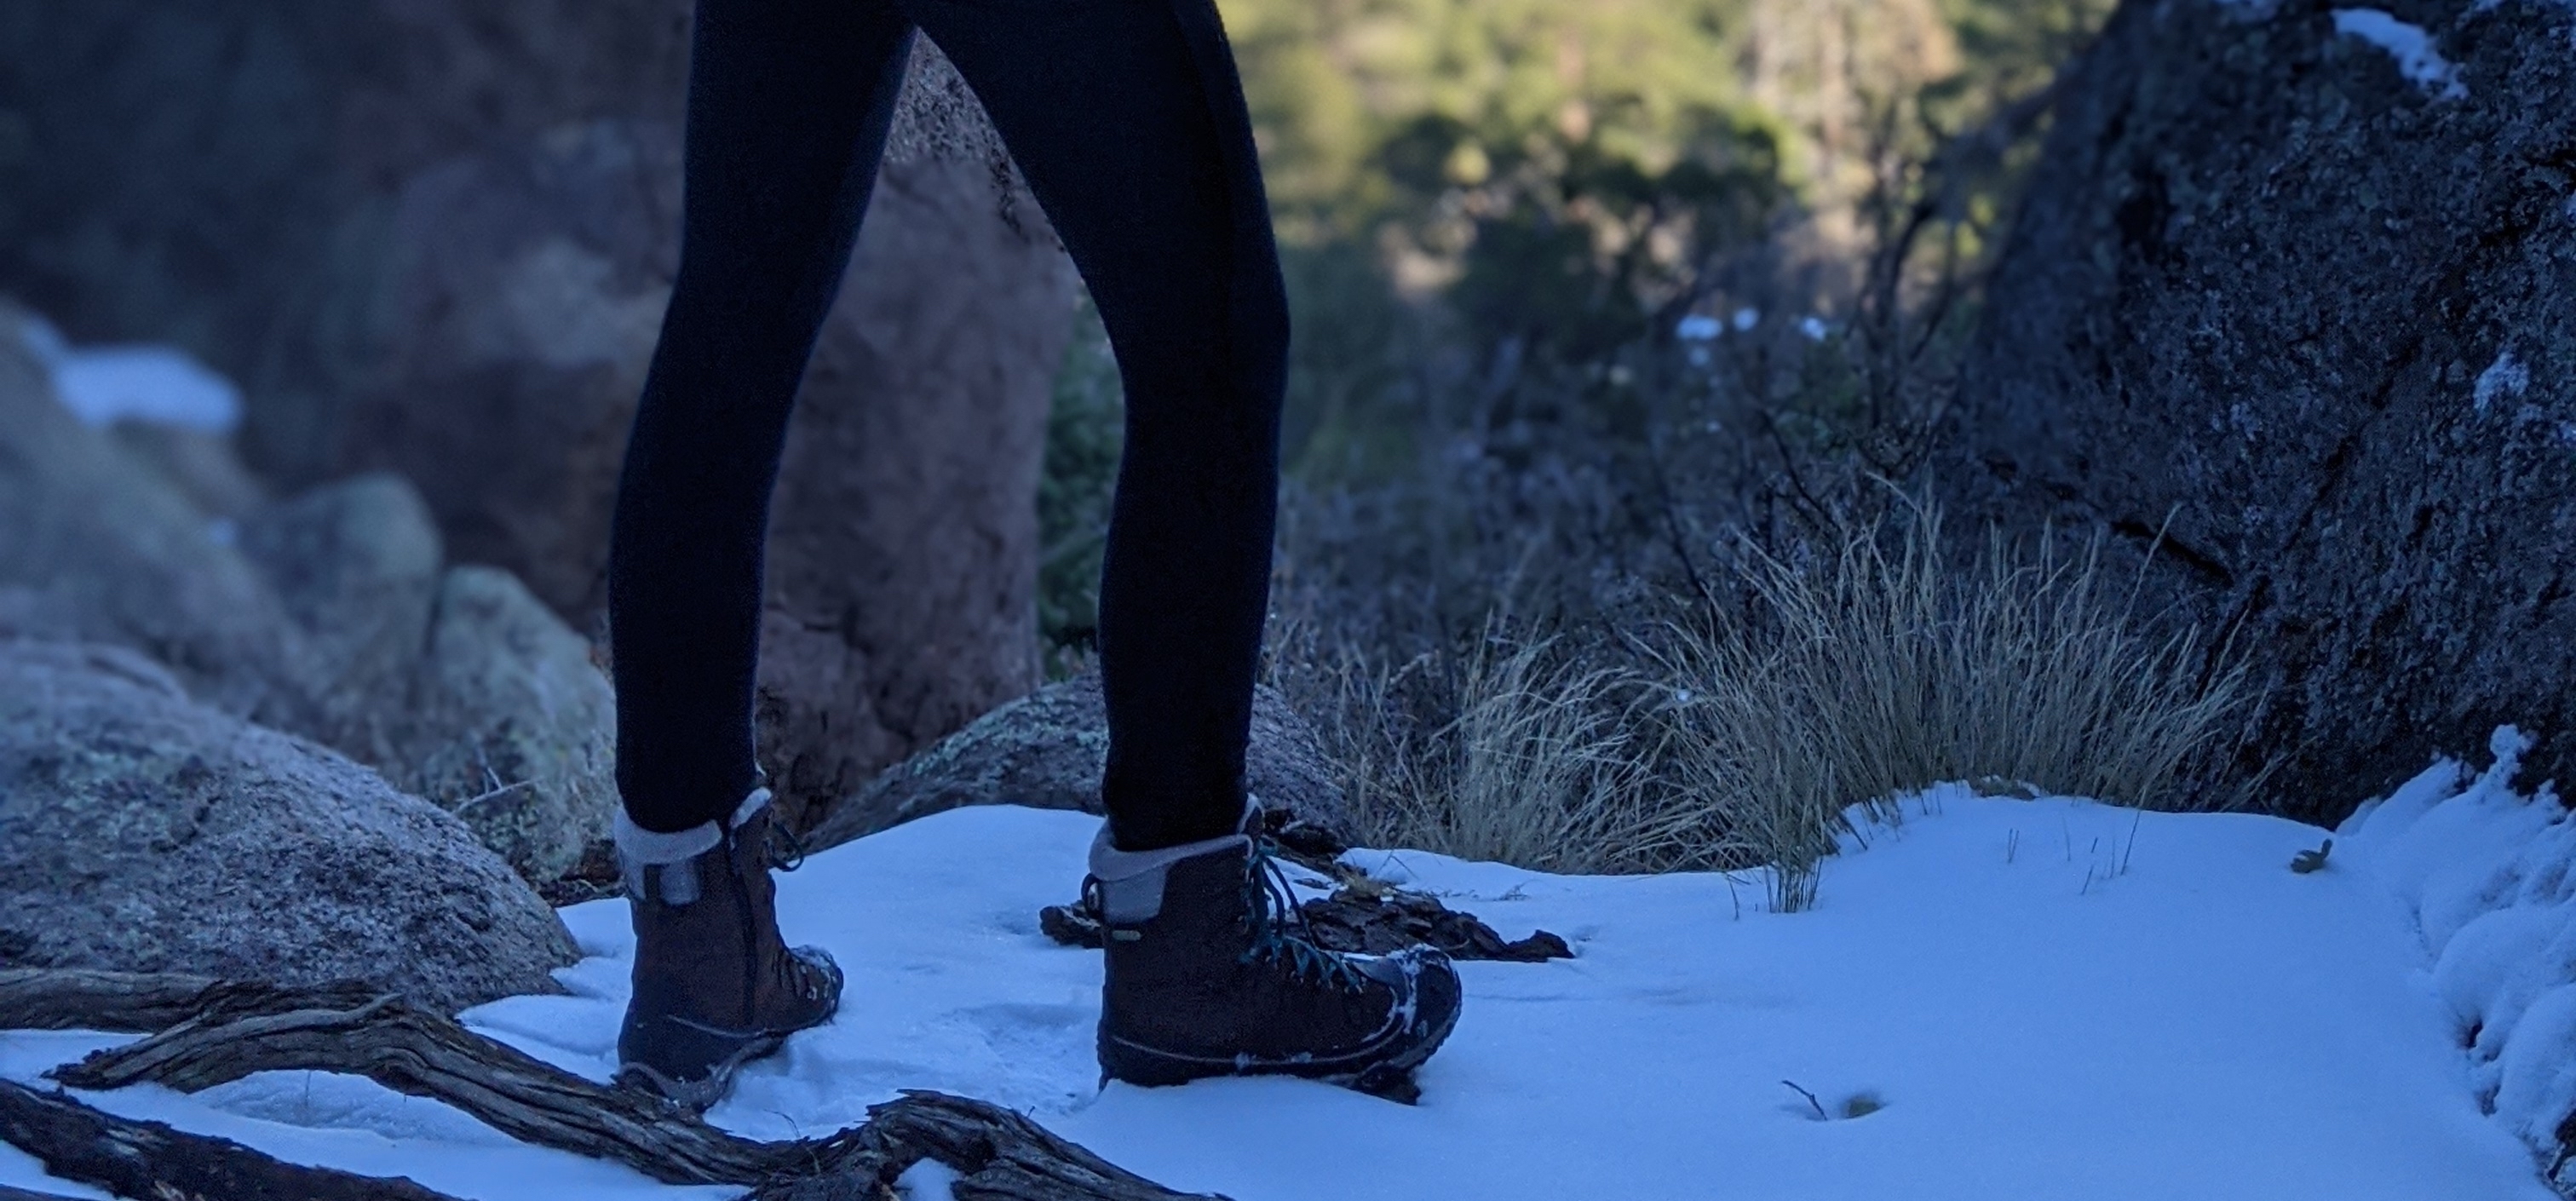 Oboz Sapphire insulated winter boots in snowy terrain.